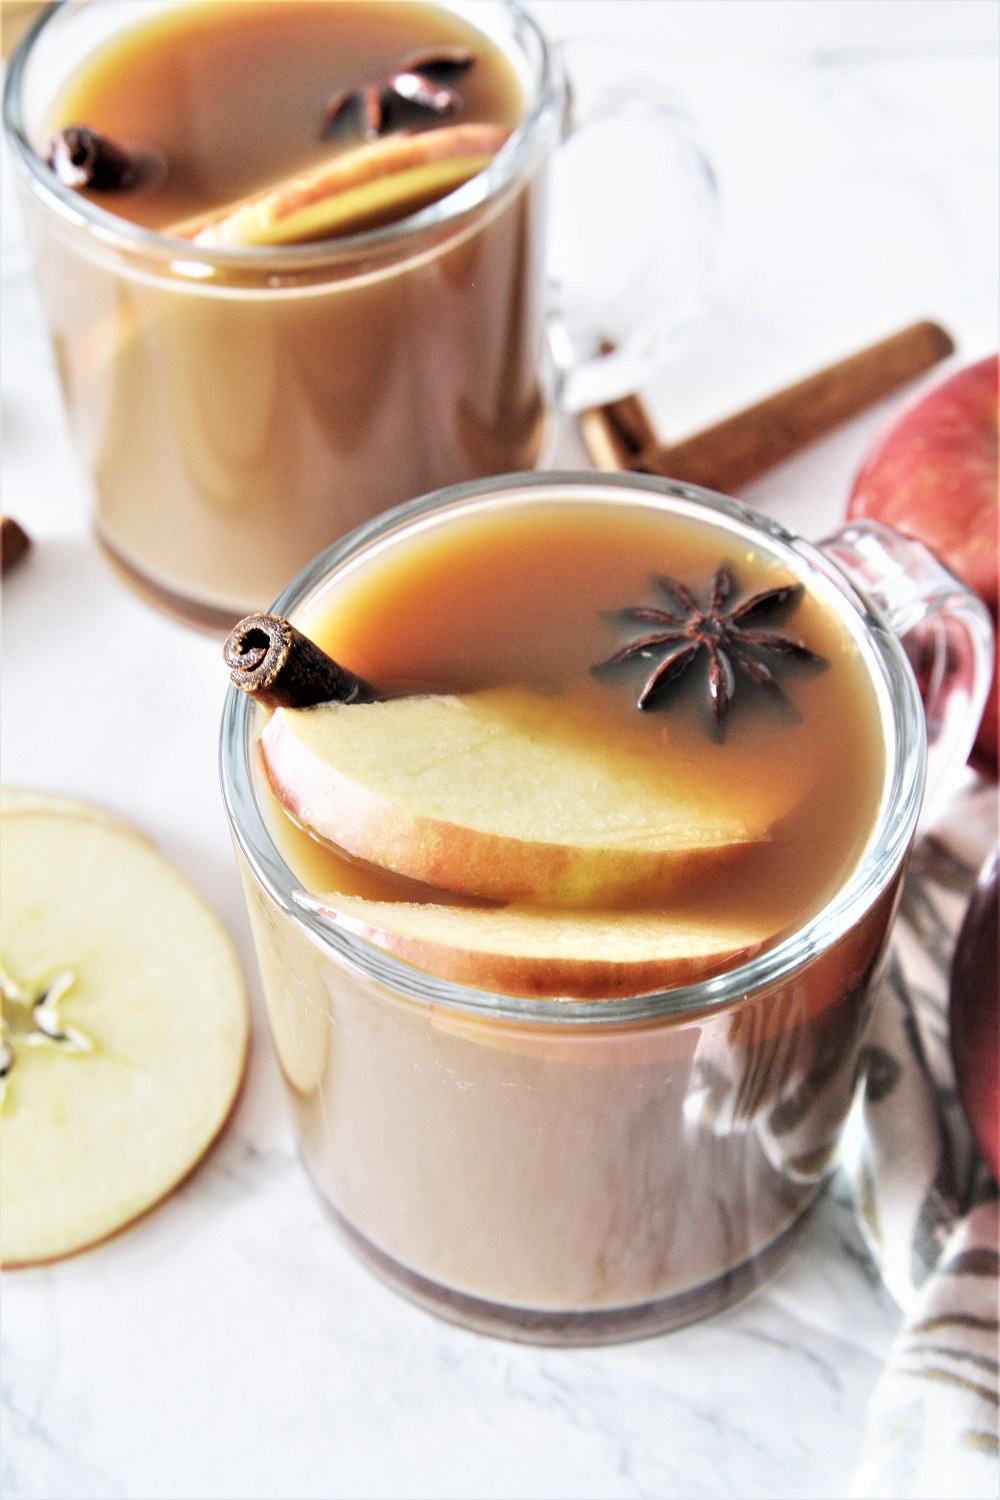 Mulled apple cider with warm spices will warm you up from inside out. This cozy and comforting drink is made in the Instant Pot, and the best part is that it's ready in just 15 minutes of cooking time!